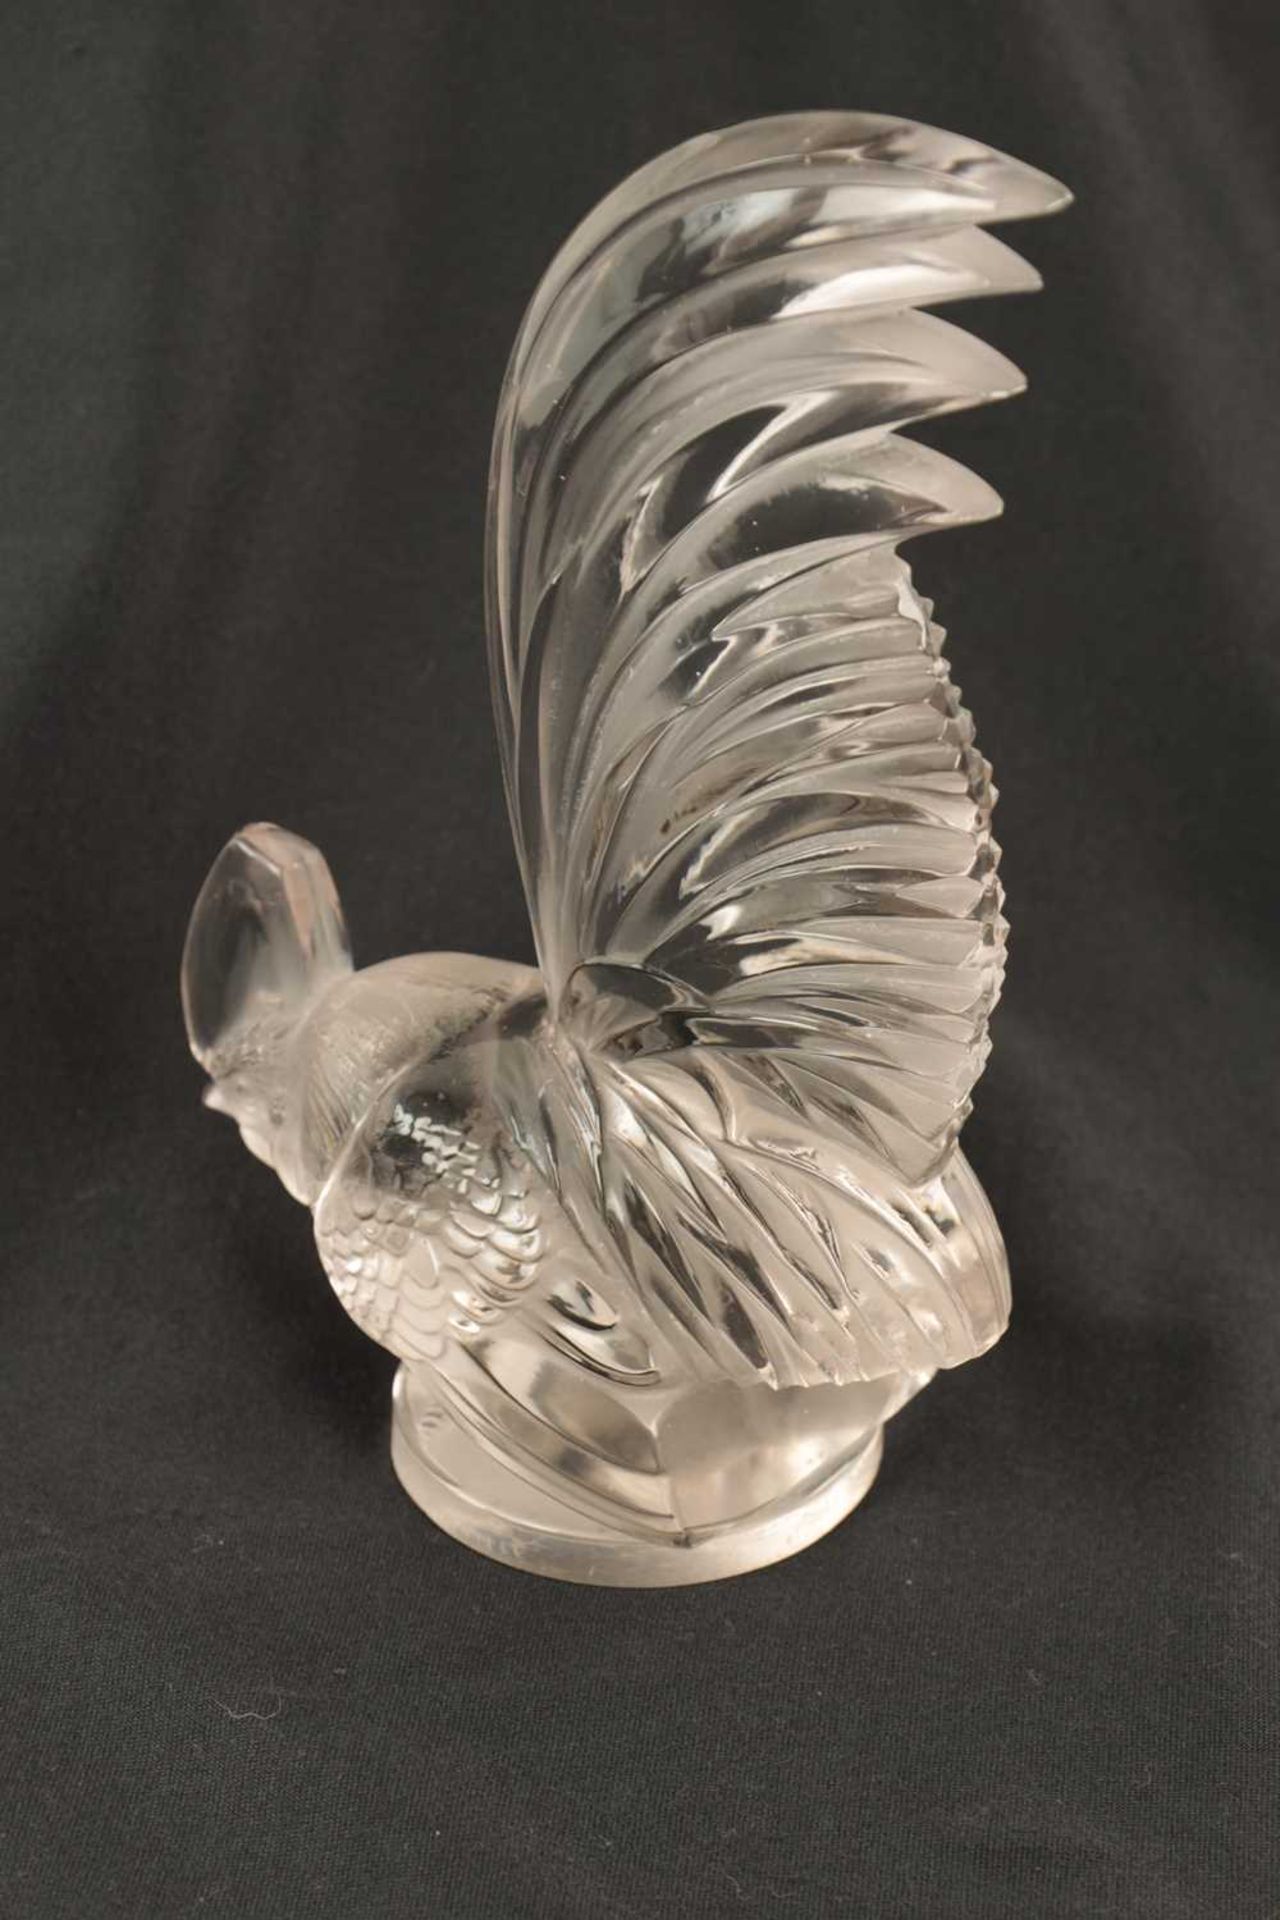 A RENE LALIQUE 'COQ NAIN' CLEAR GLASS AND FROSTED CAR MASCOT - Image 5 of 10